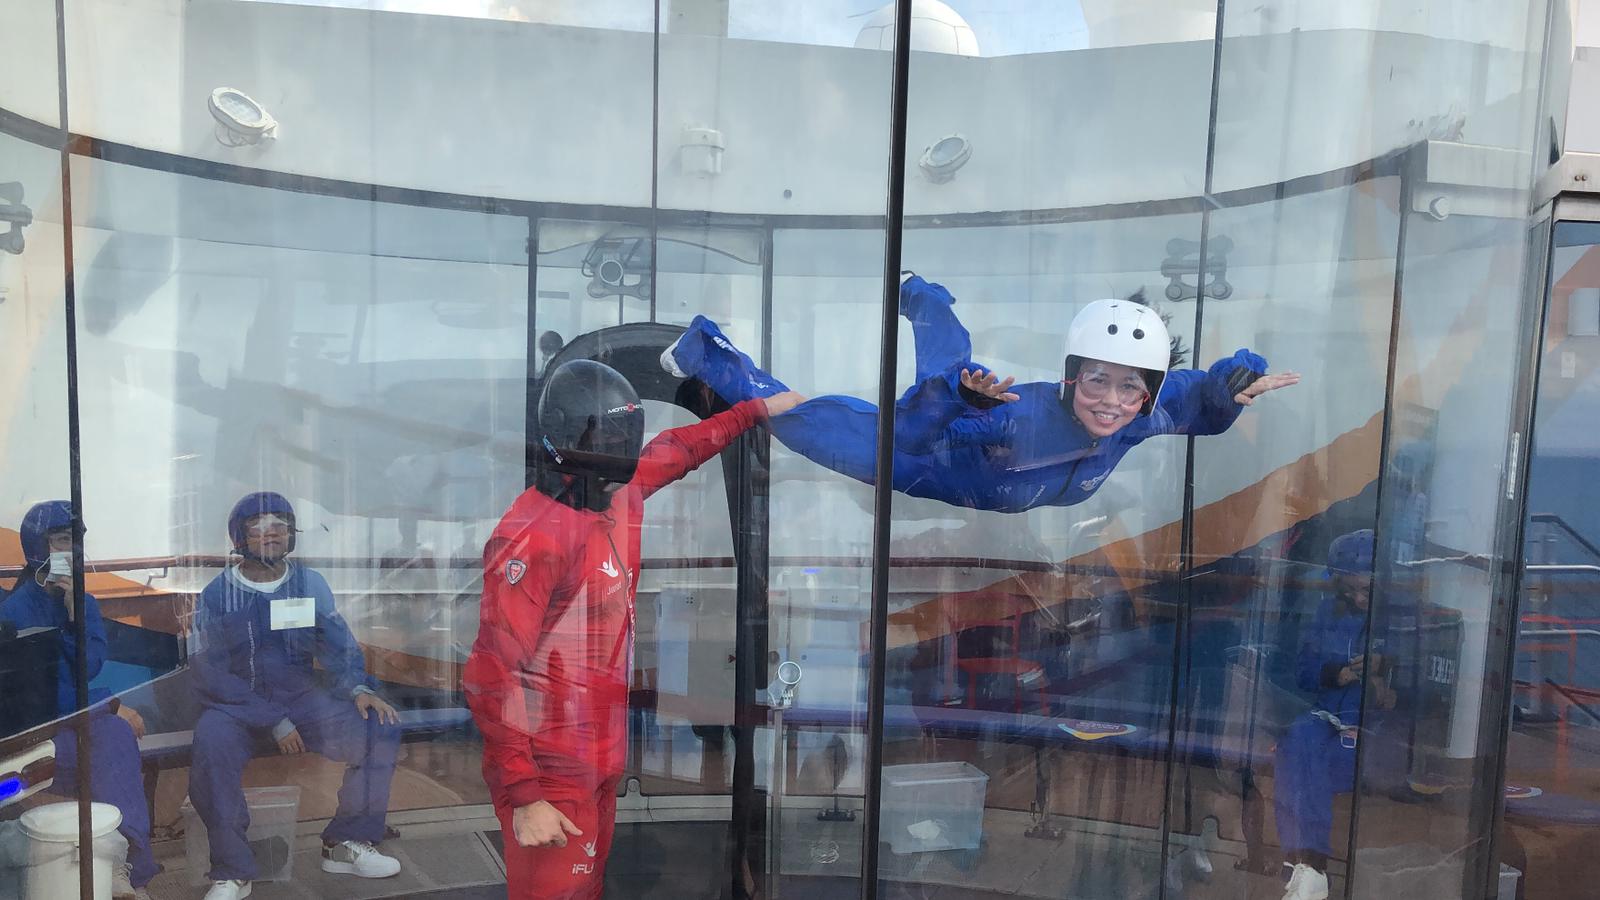 Rebecca on the iFly